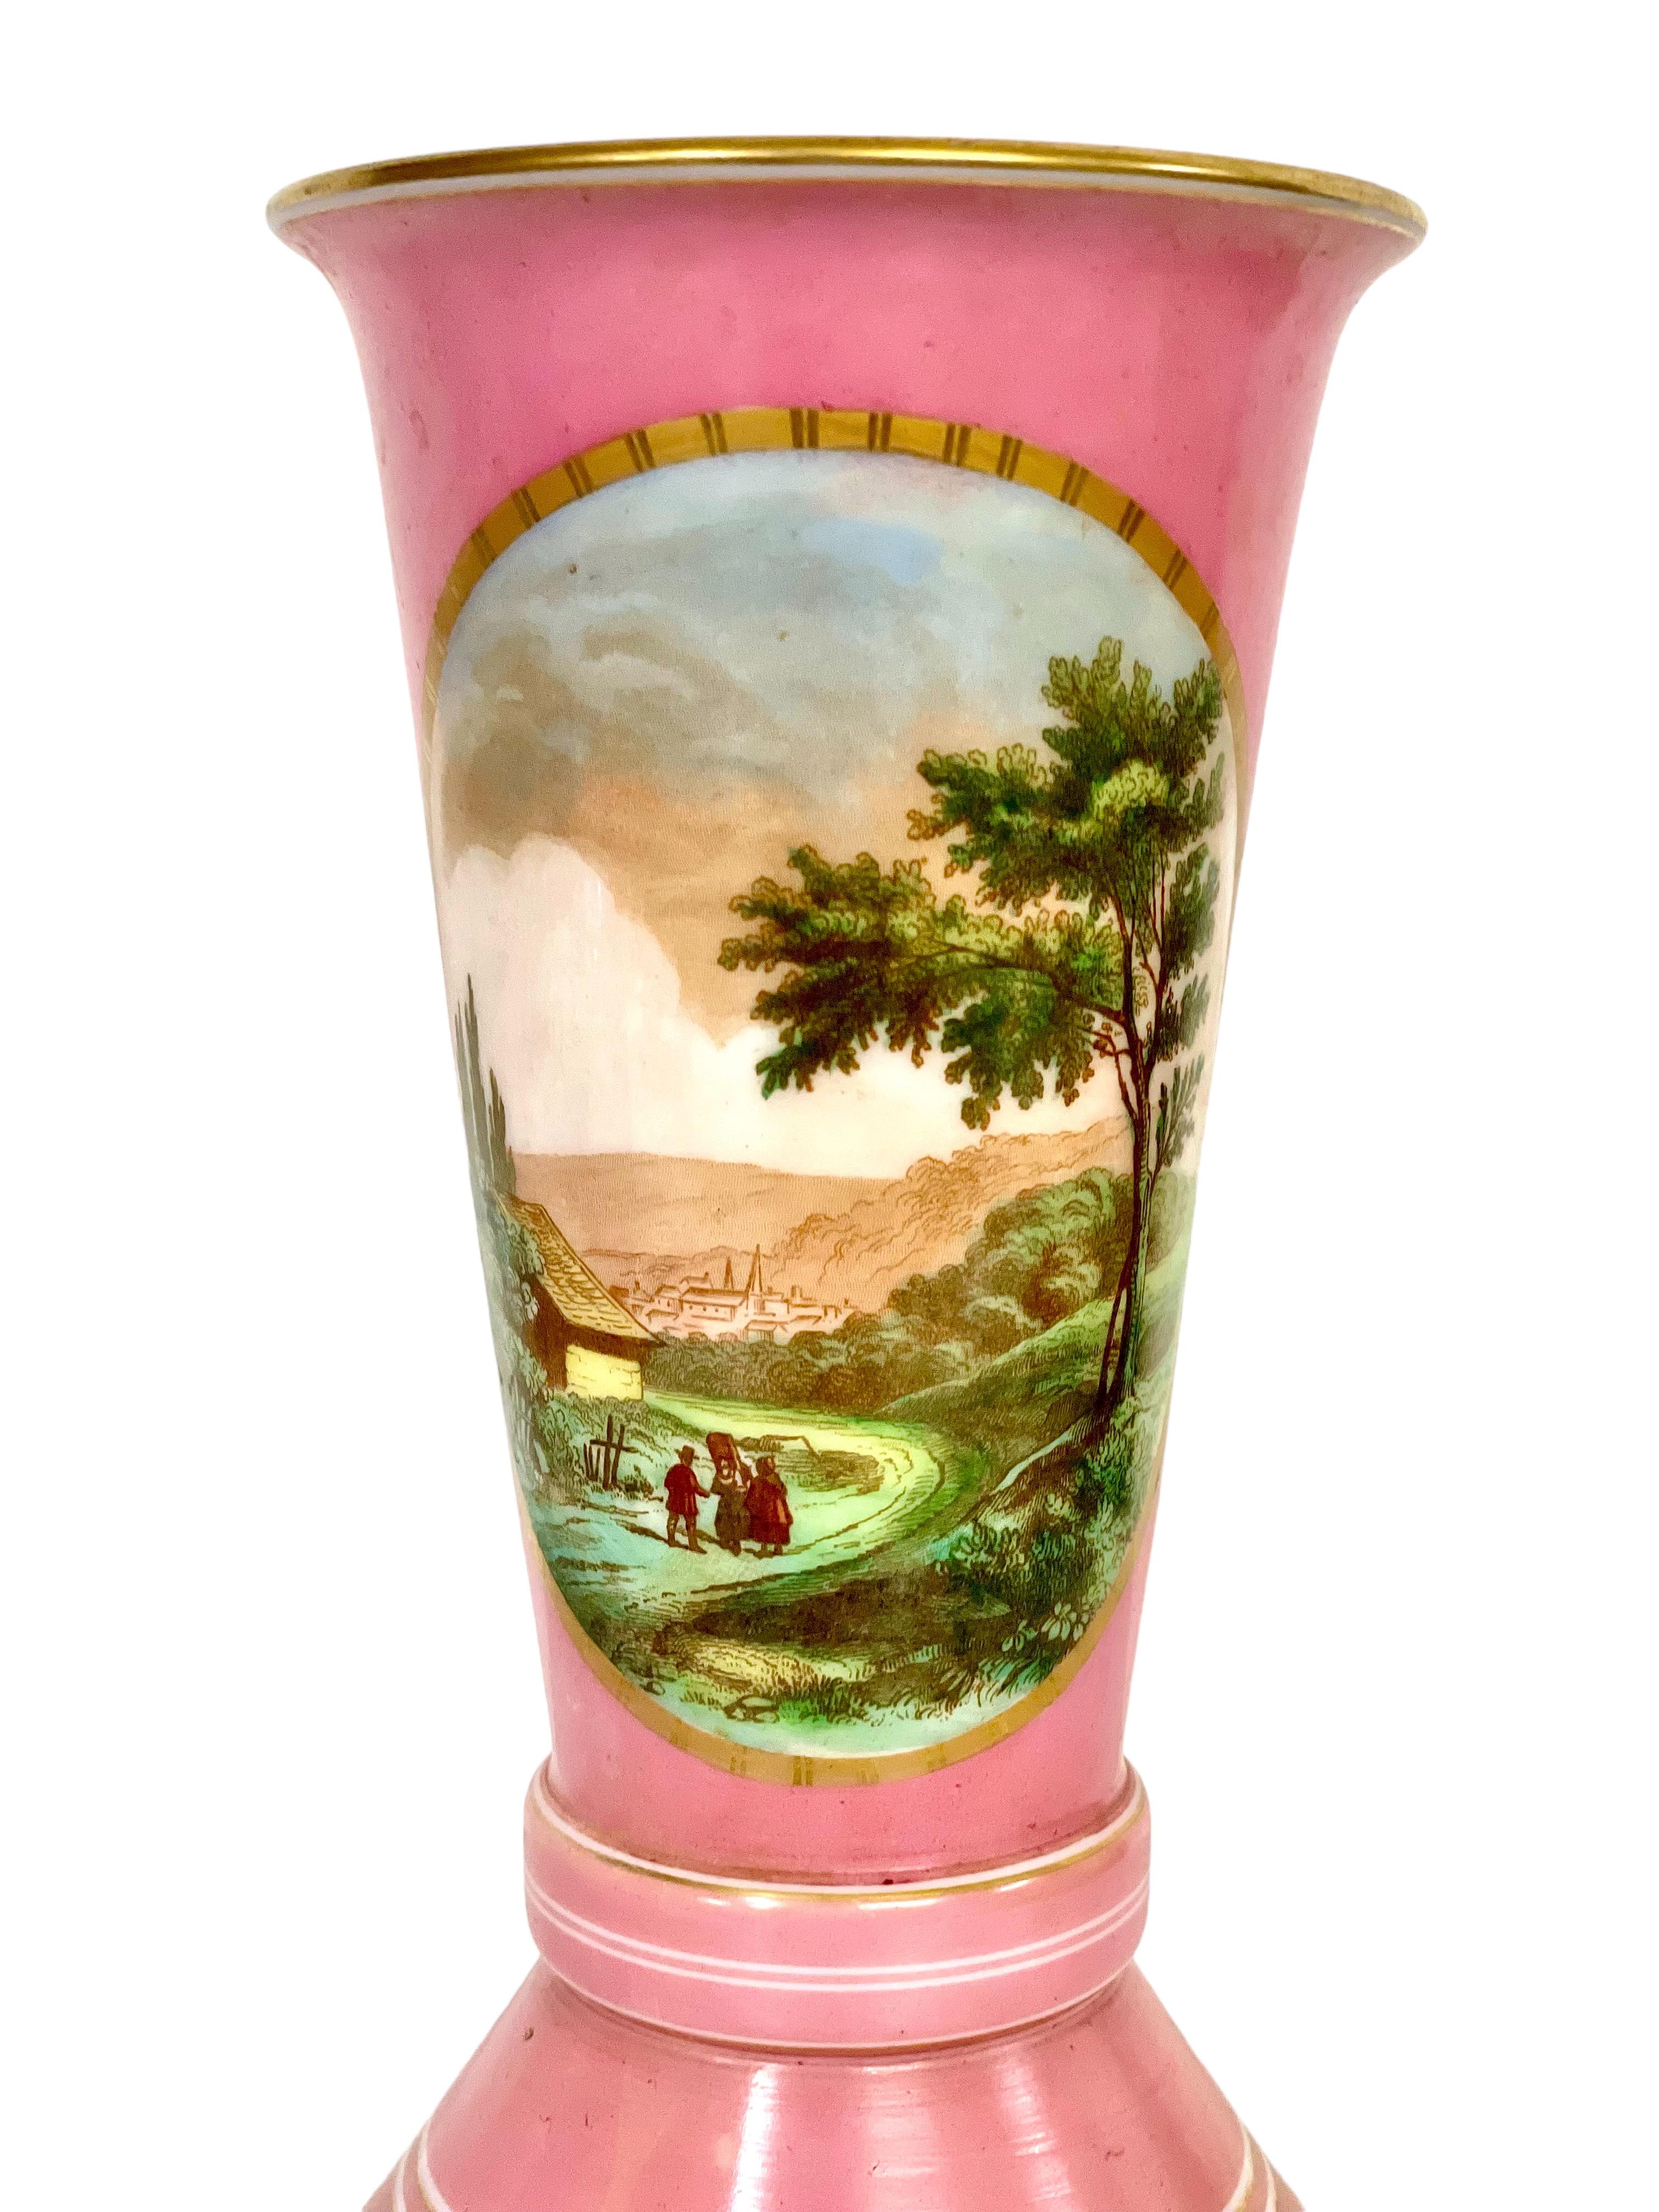 A very pretty pink opaline Sèvres-style vase, hand-blown and embellished throughout with gilt bands and accents. The tall and gently flaring neck has been beautifully hand-painted with a pastoral scene of figures in a rural landscape, its warm